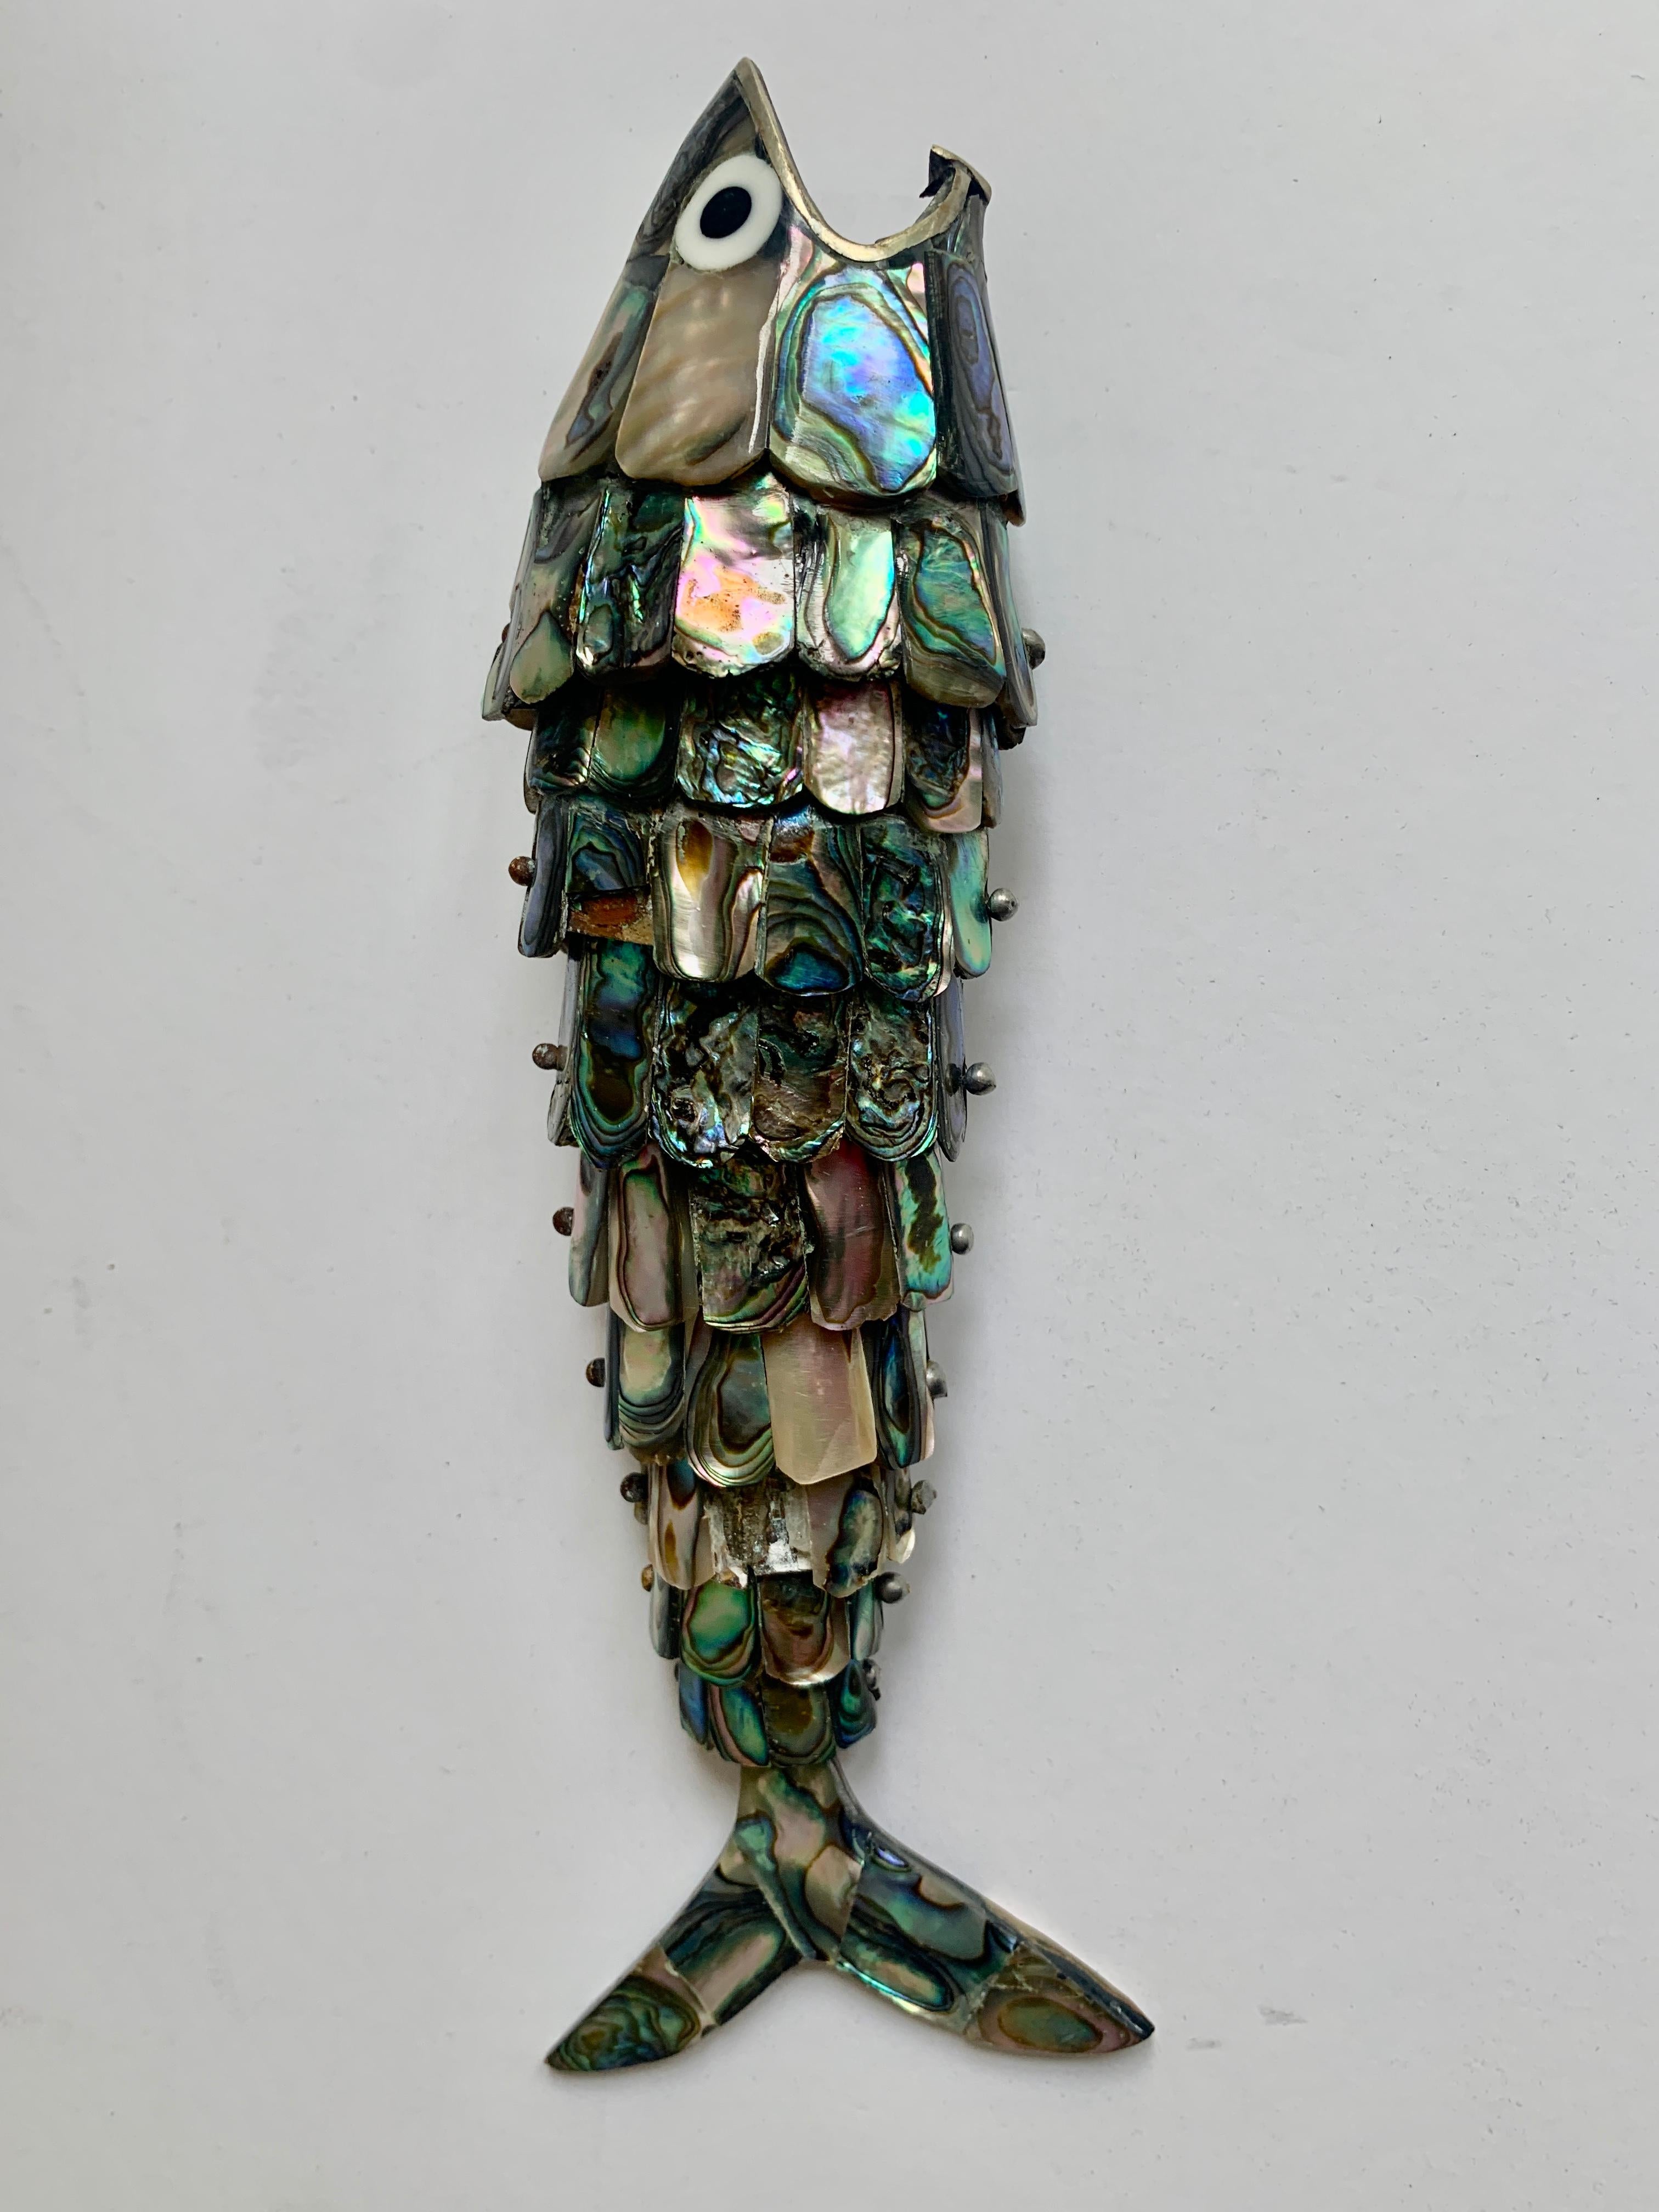 Articulated abalone fish bottle opener - a wonderful midcentury bar favorite. The bottle opener is larger than most we have seen and is a great decorative conversation piece. The unique design allows the fish to stand on it's tail.

      